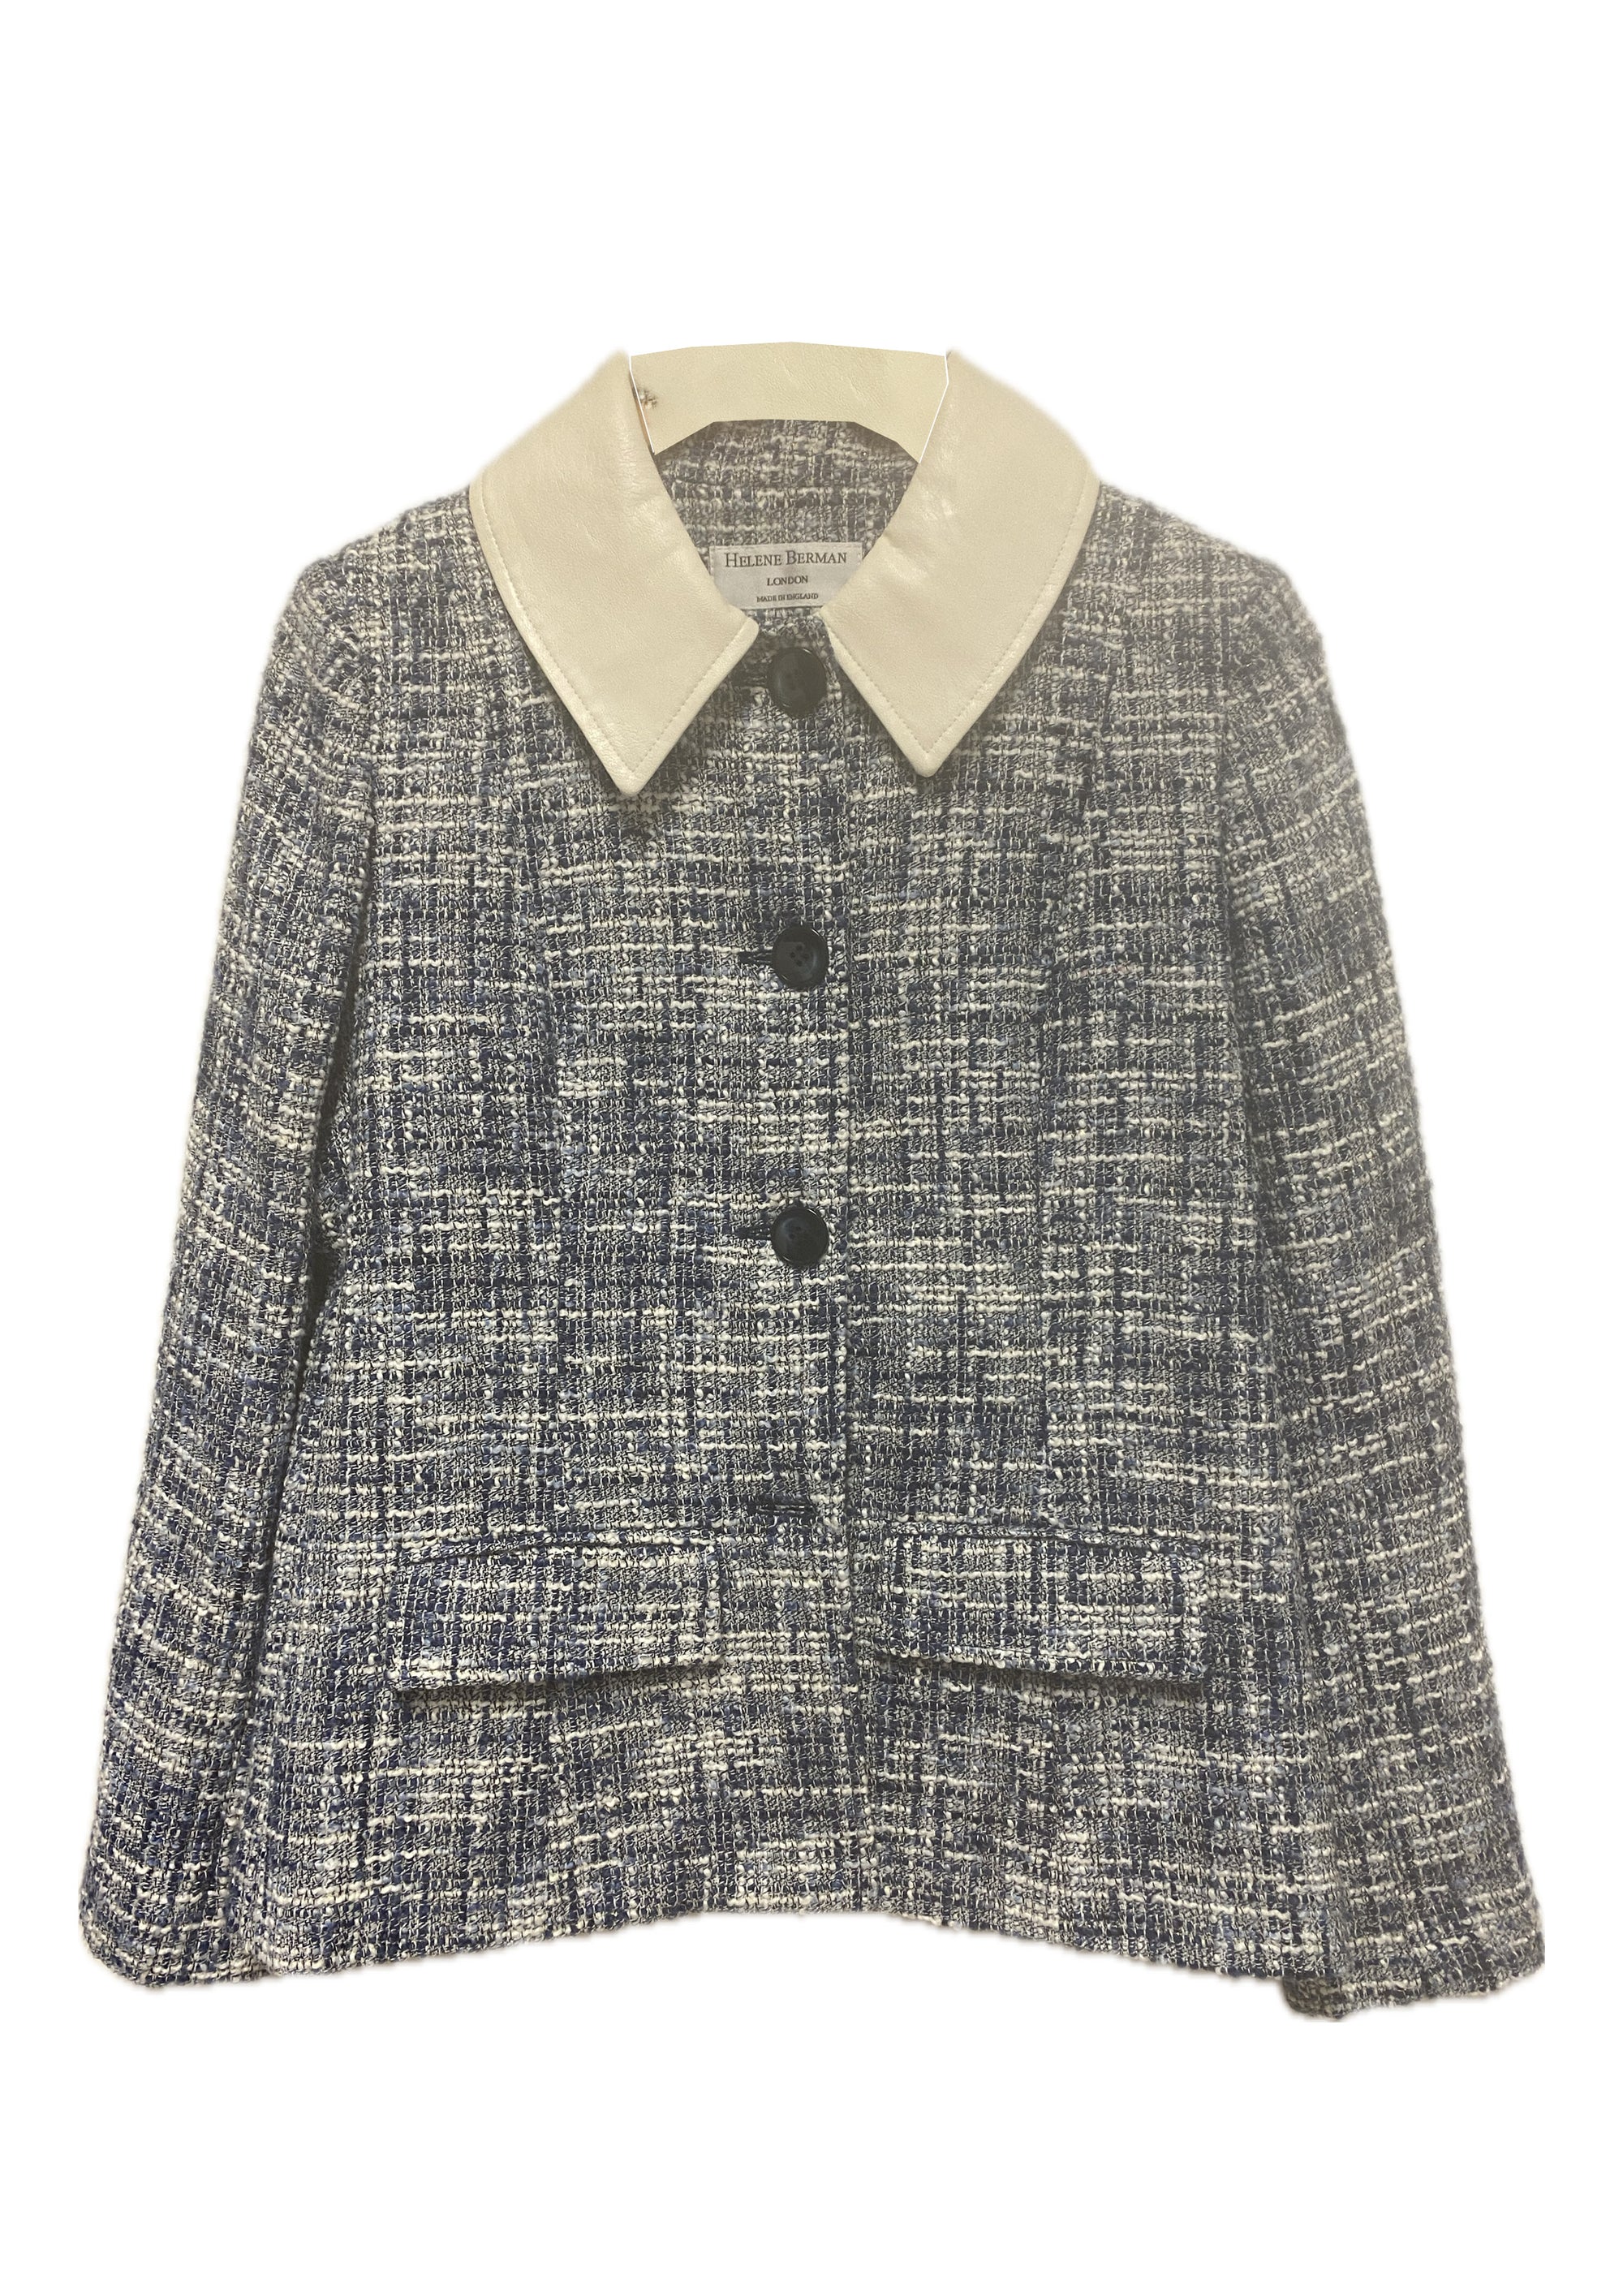 Blue Tweed Jacket with White Faux Leather Collar